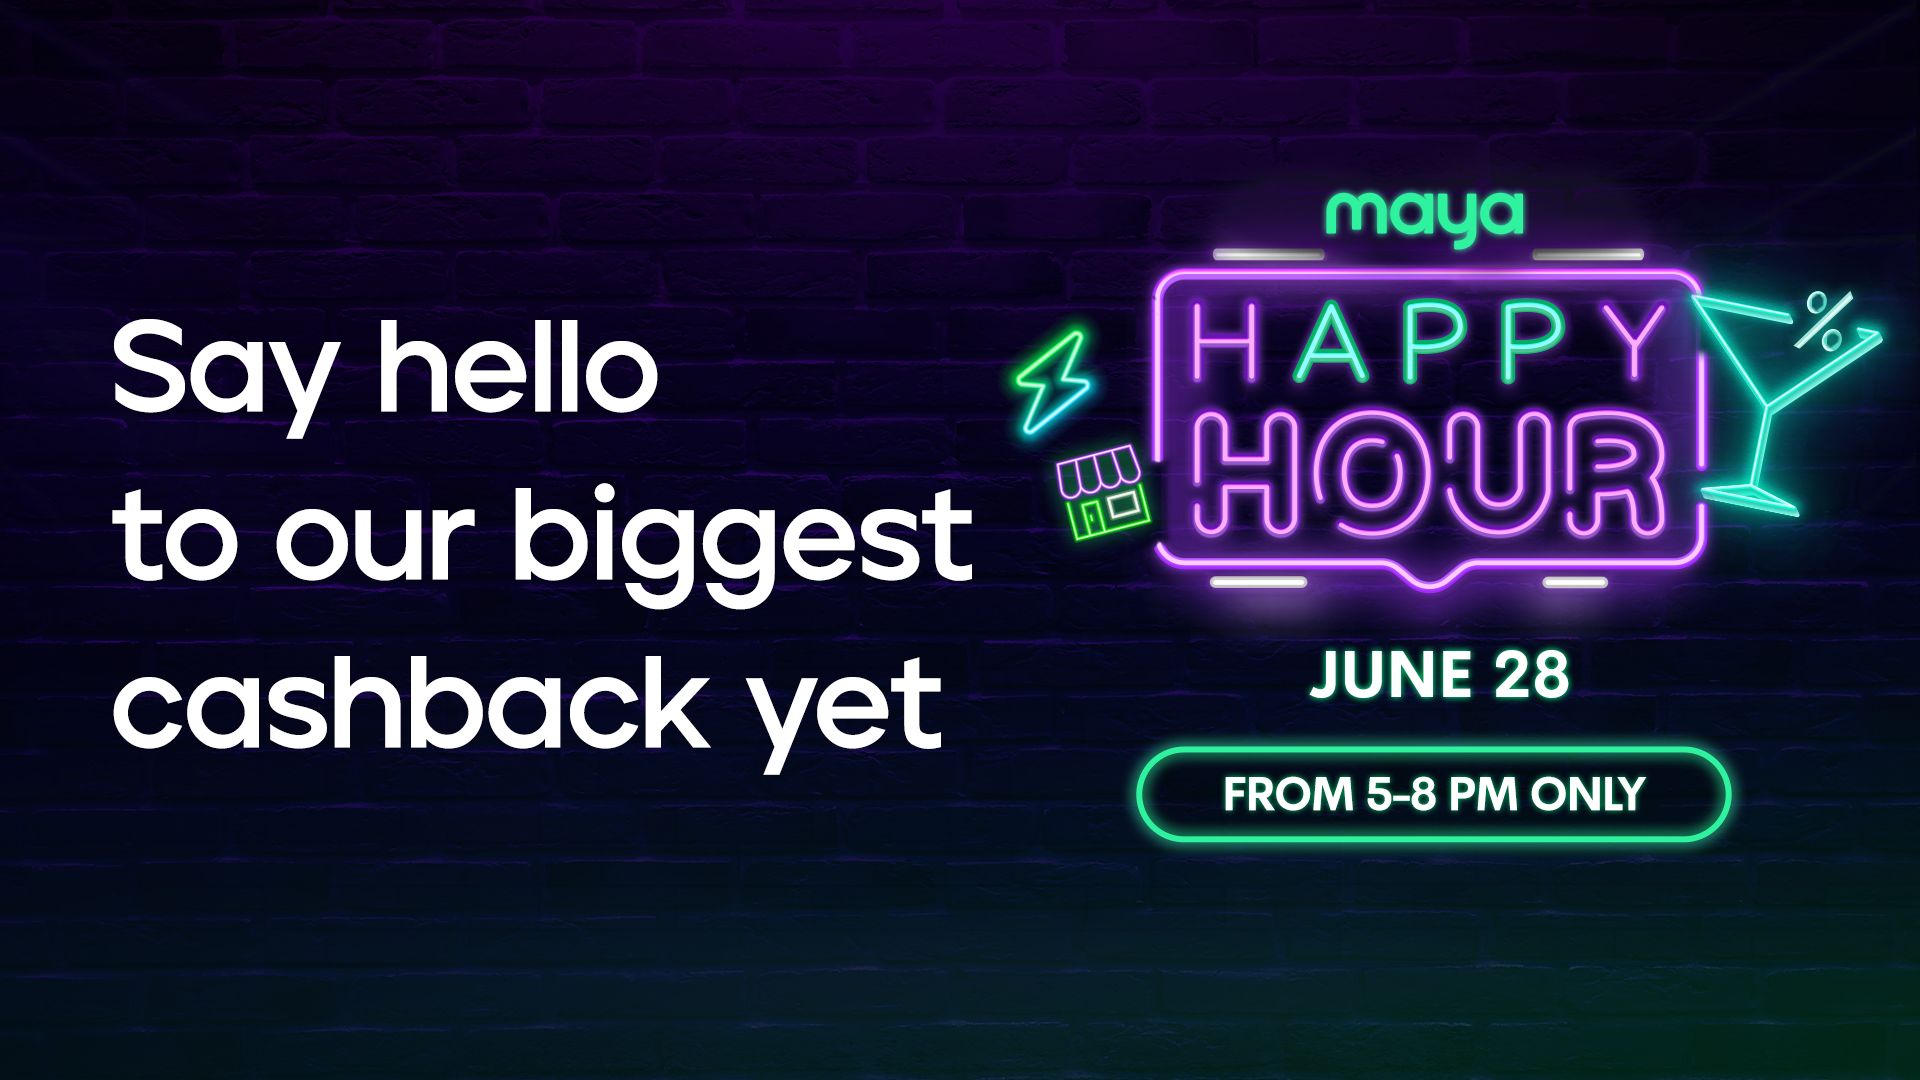 Cashback all you want for buying load and paying bills and earn up to P1350  during Happy hour!